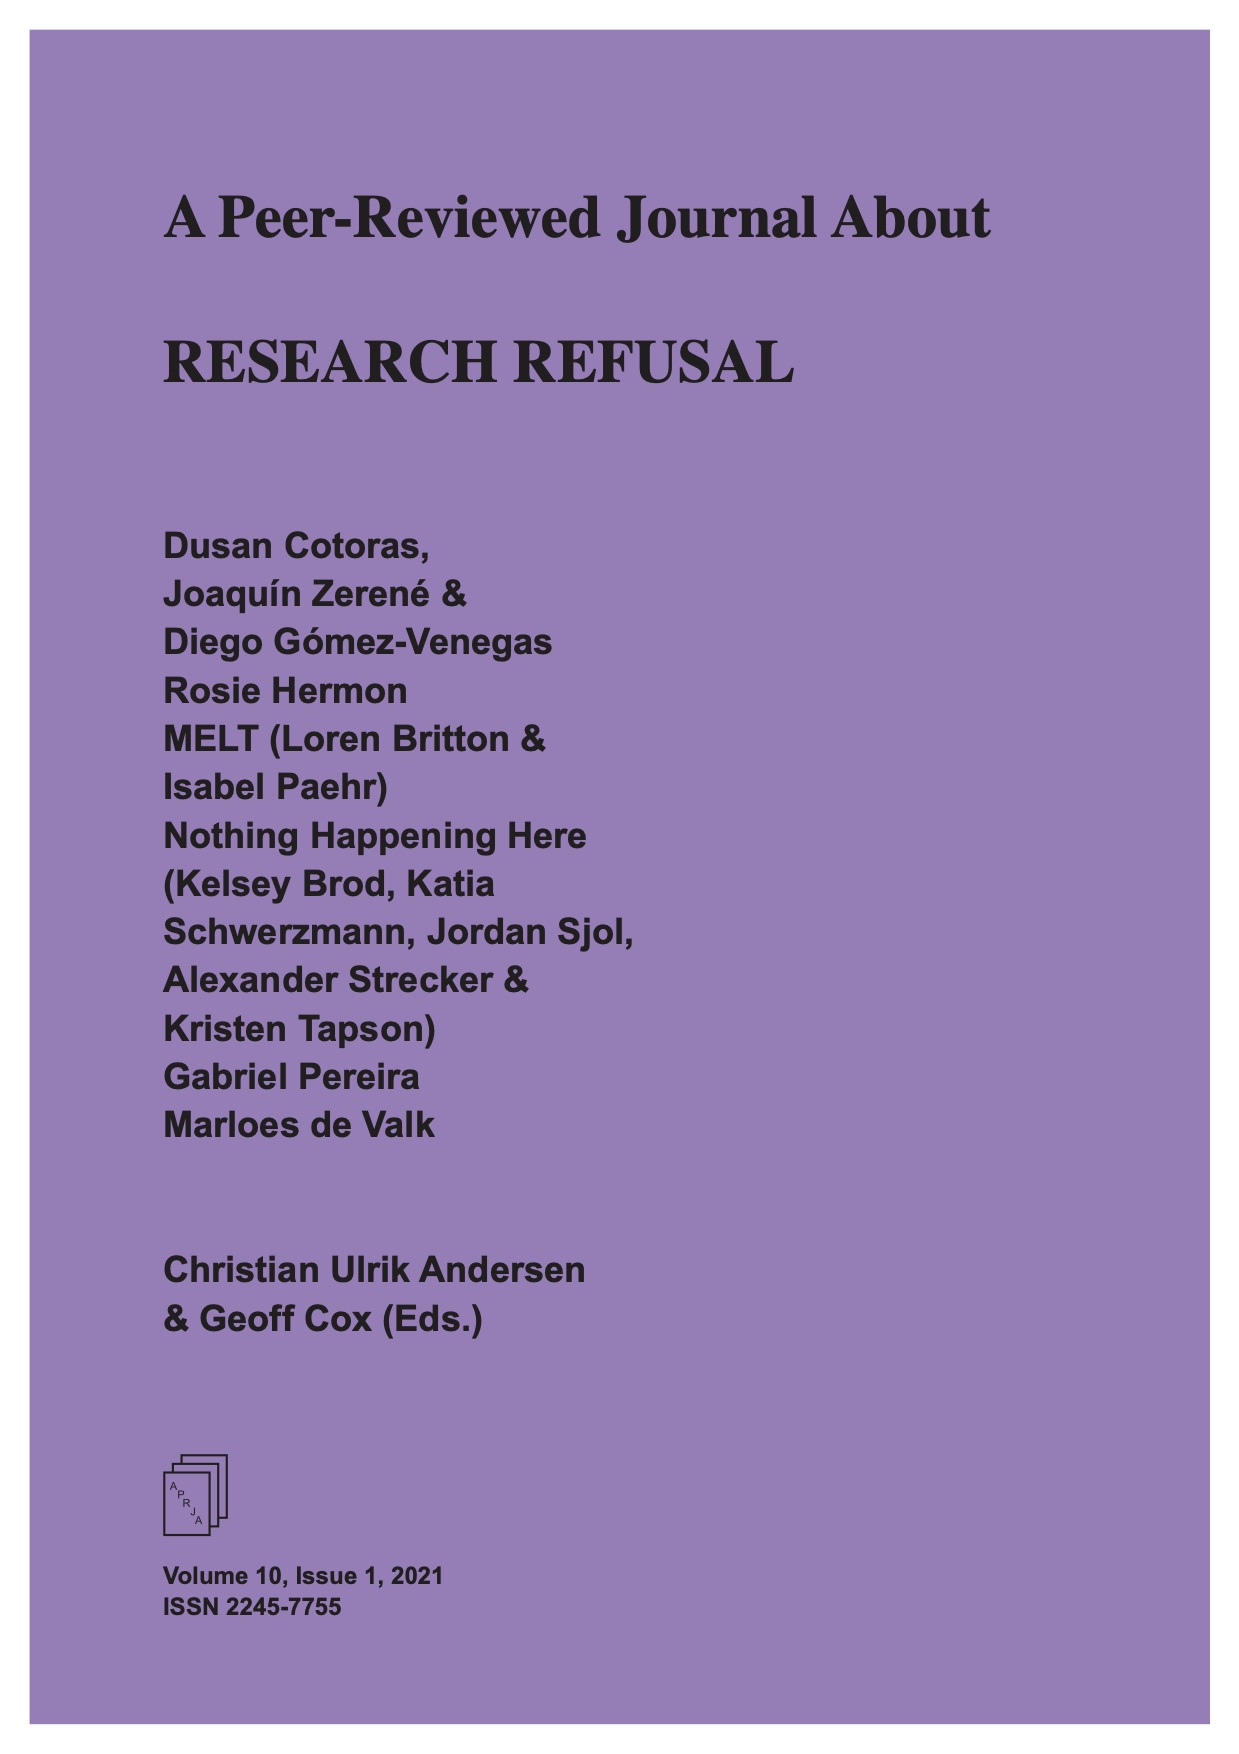 					View Vol. 10 No. 1 (2021): Research Refusal
				